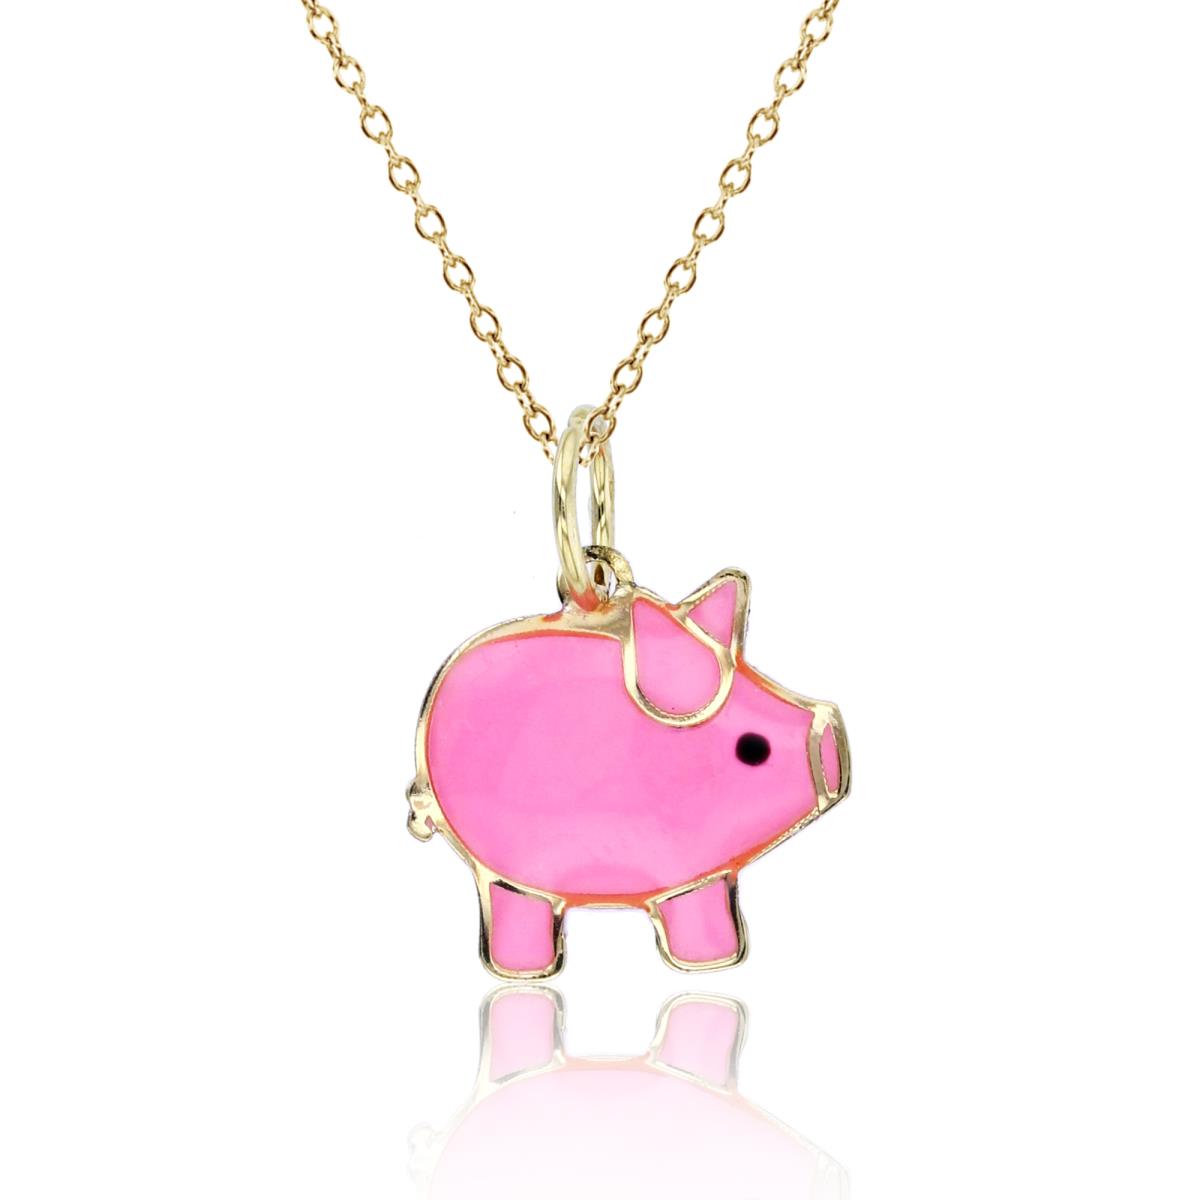 14K Yellow Gold Enamel 17x13mm Pinky Pig 18"Necklace